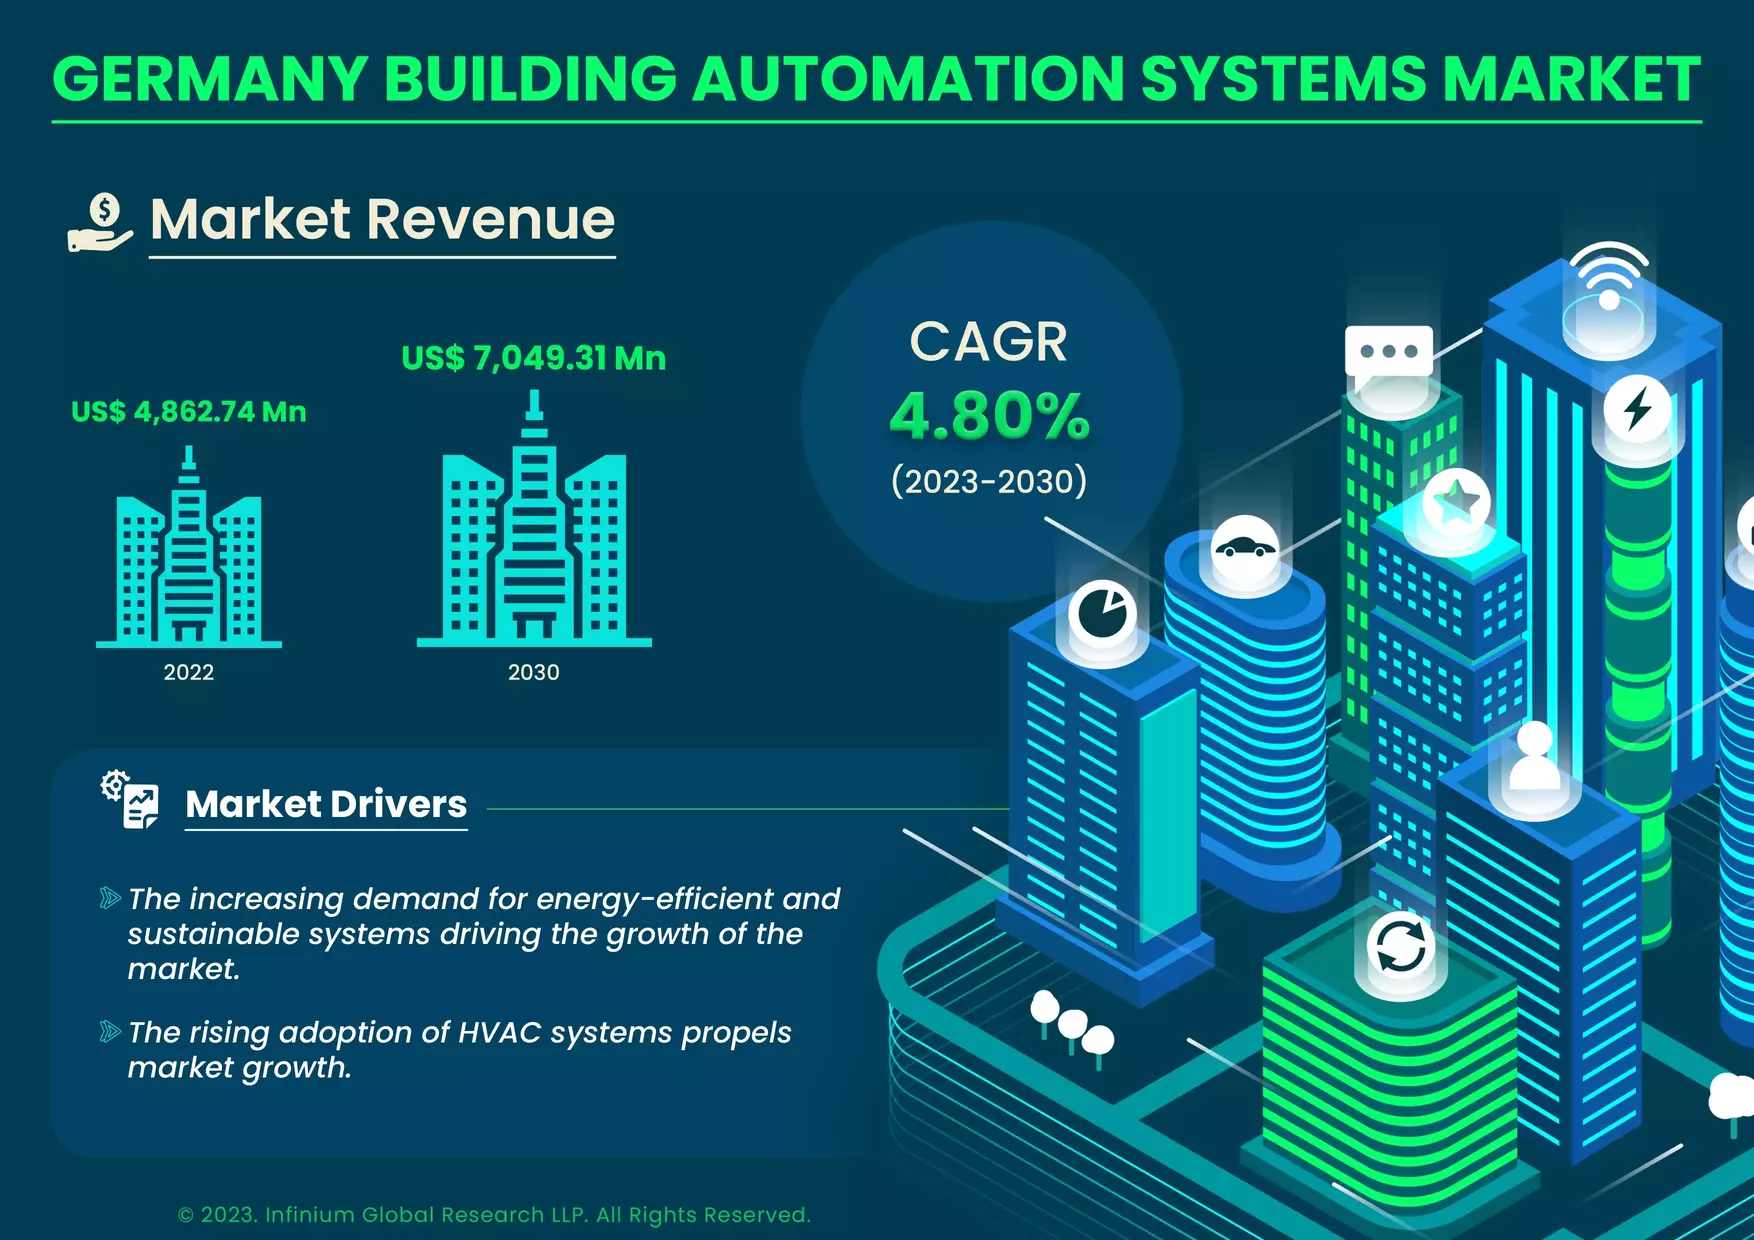 Germany Building Automation Systems Market was Valued at USD 4,862.74 Million in 2022 and is Expected to Reach USD 7,049.31 Million by 2030 and Grow at a CAGR of 4.80% Over the Forecast Period.